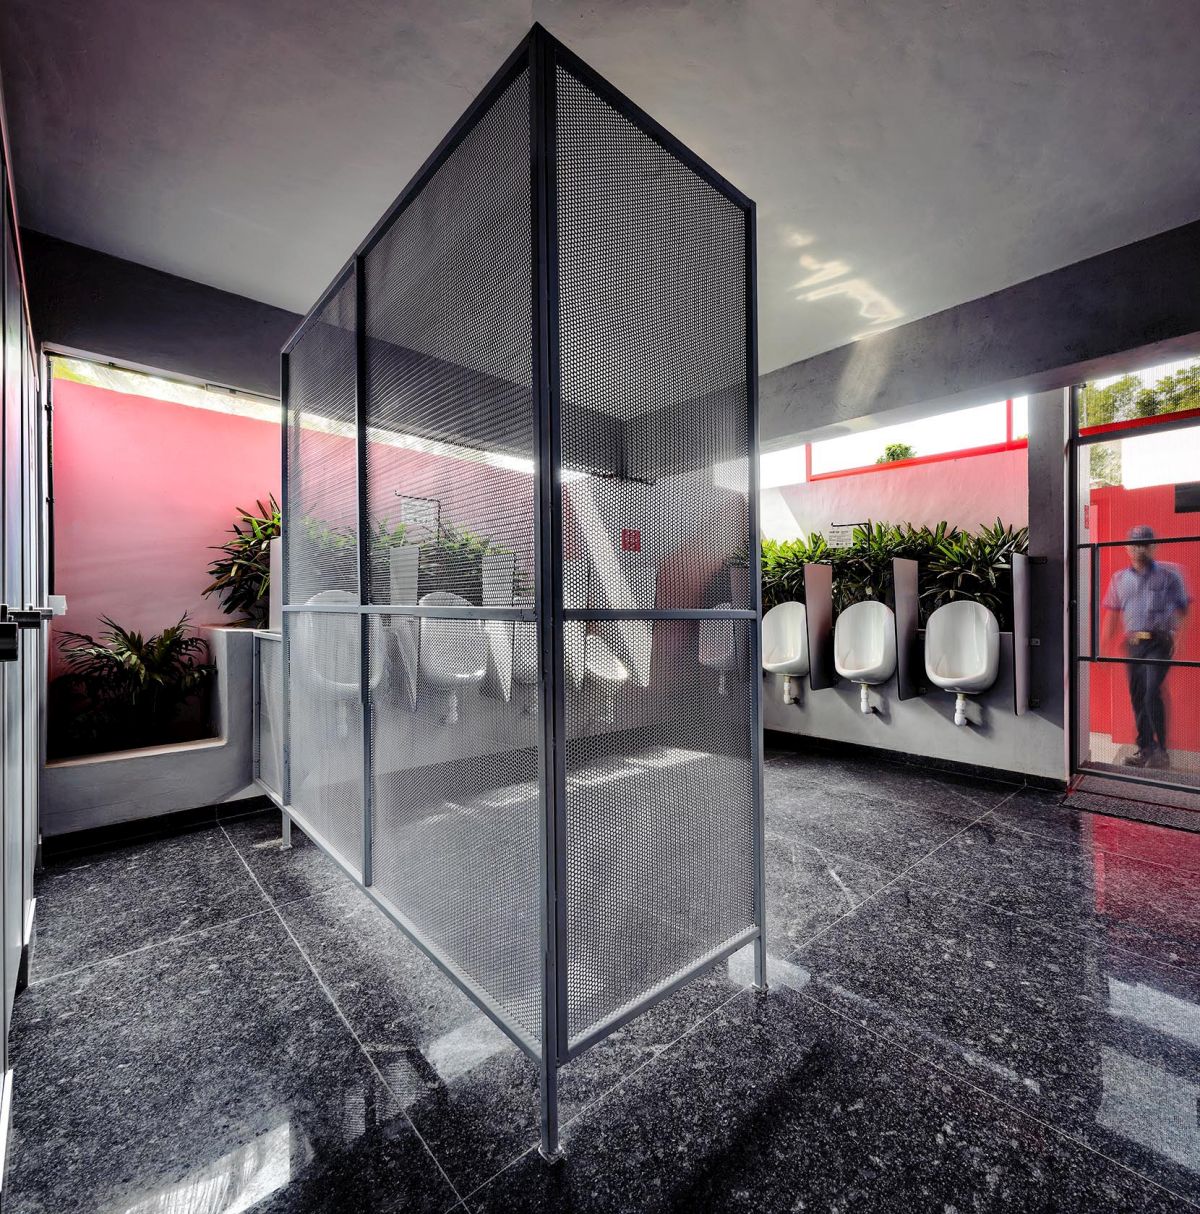 Pause - Restrooms, at Bombay-Goa Highway, by RC Architects 19